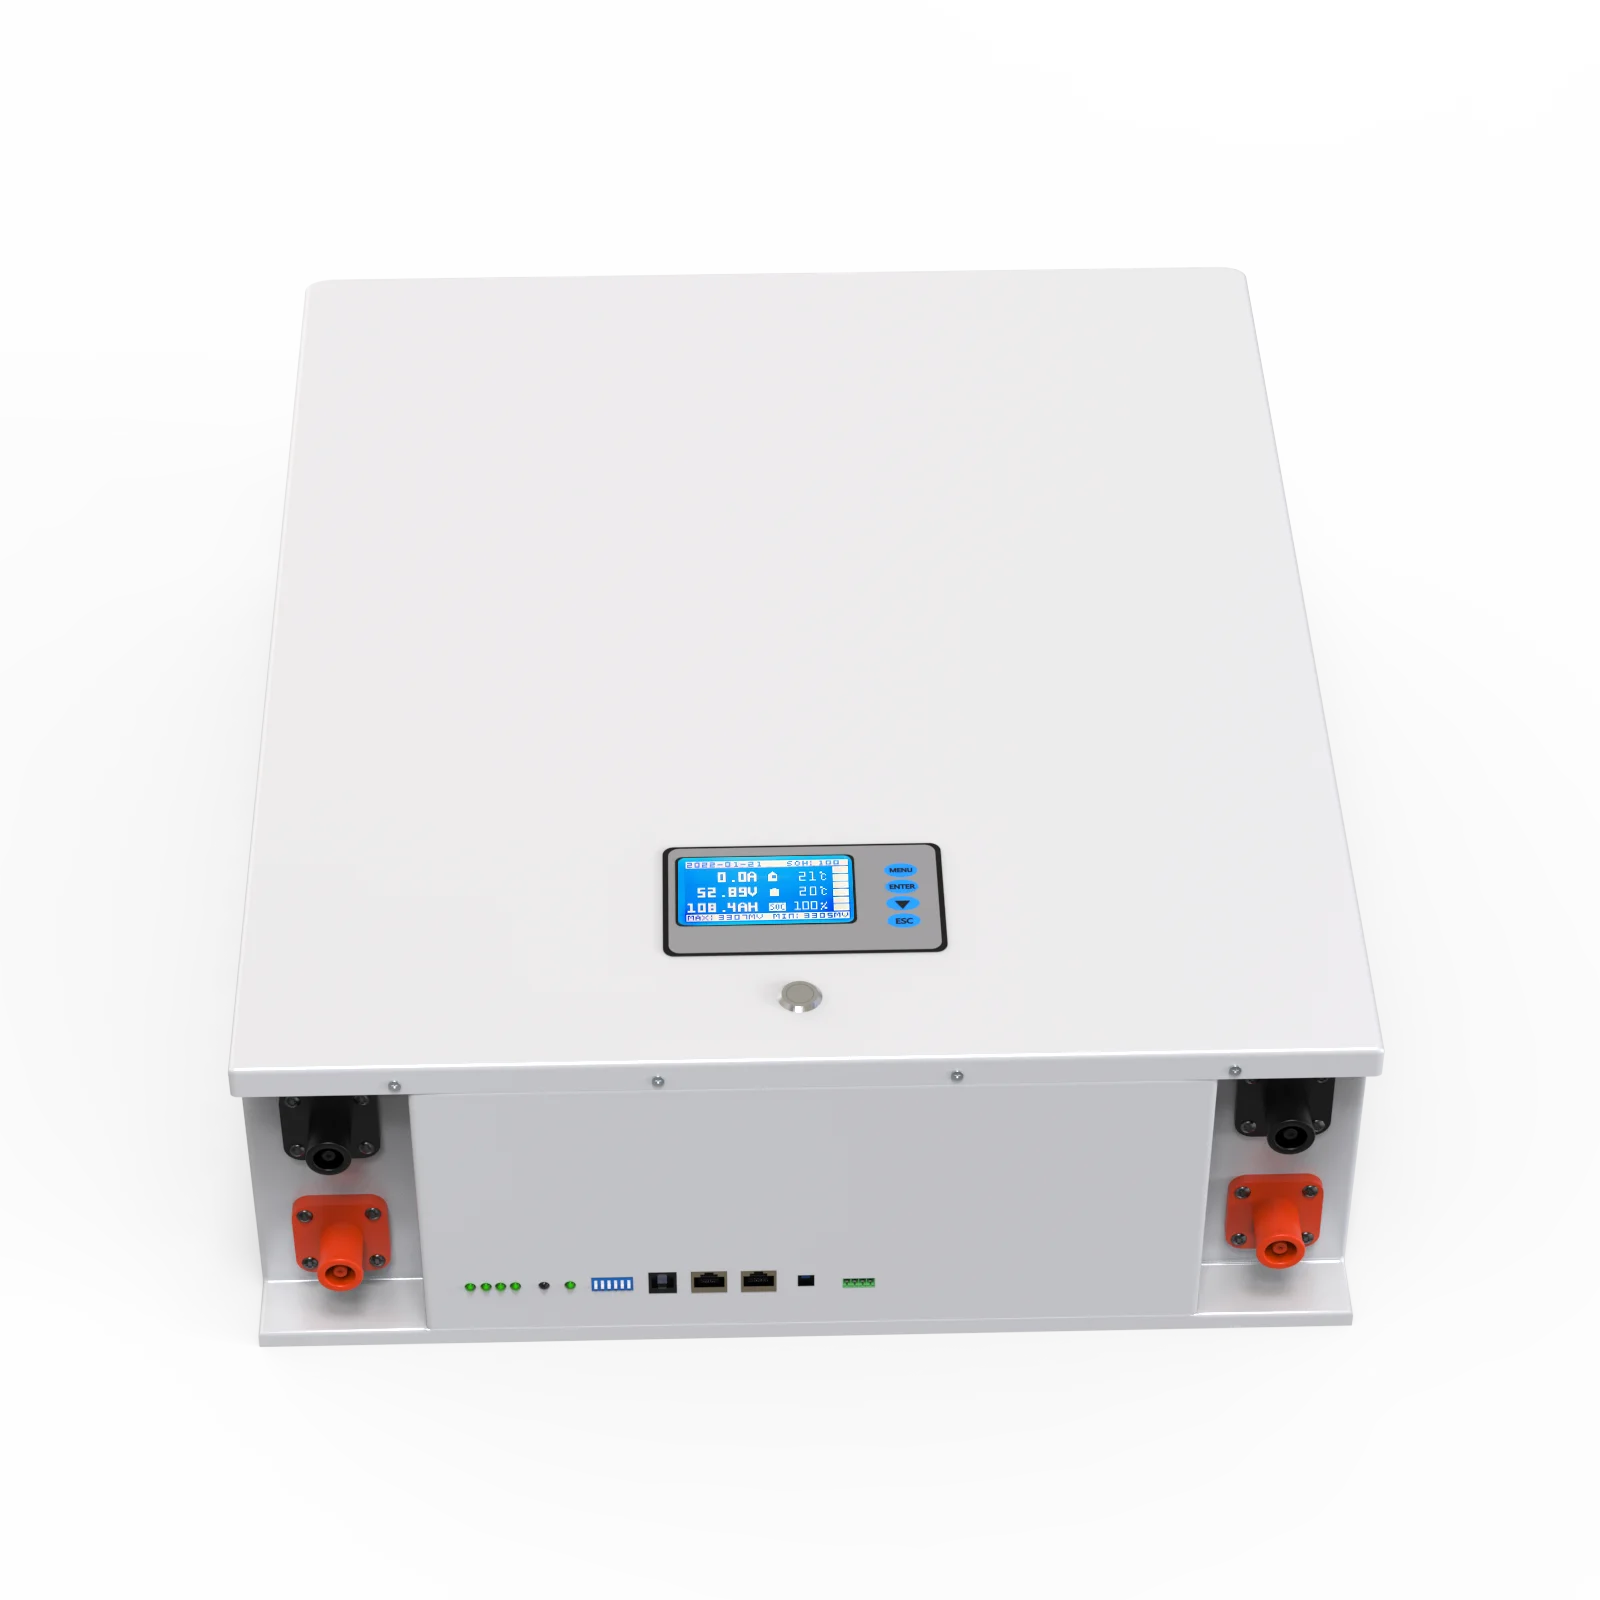 48V 100AH Powerwall LiFePO4 Battery, 48V, 100Ah lithium-ion battery pack with 5kW max power, suitable for inverters and featuring serial communication.